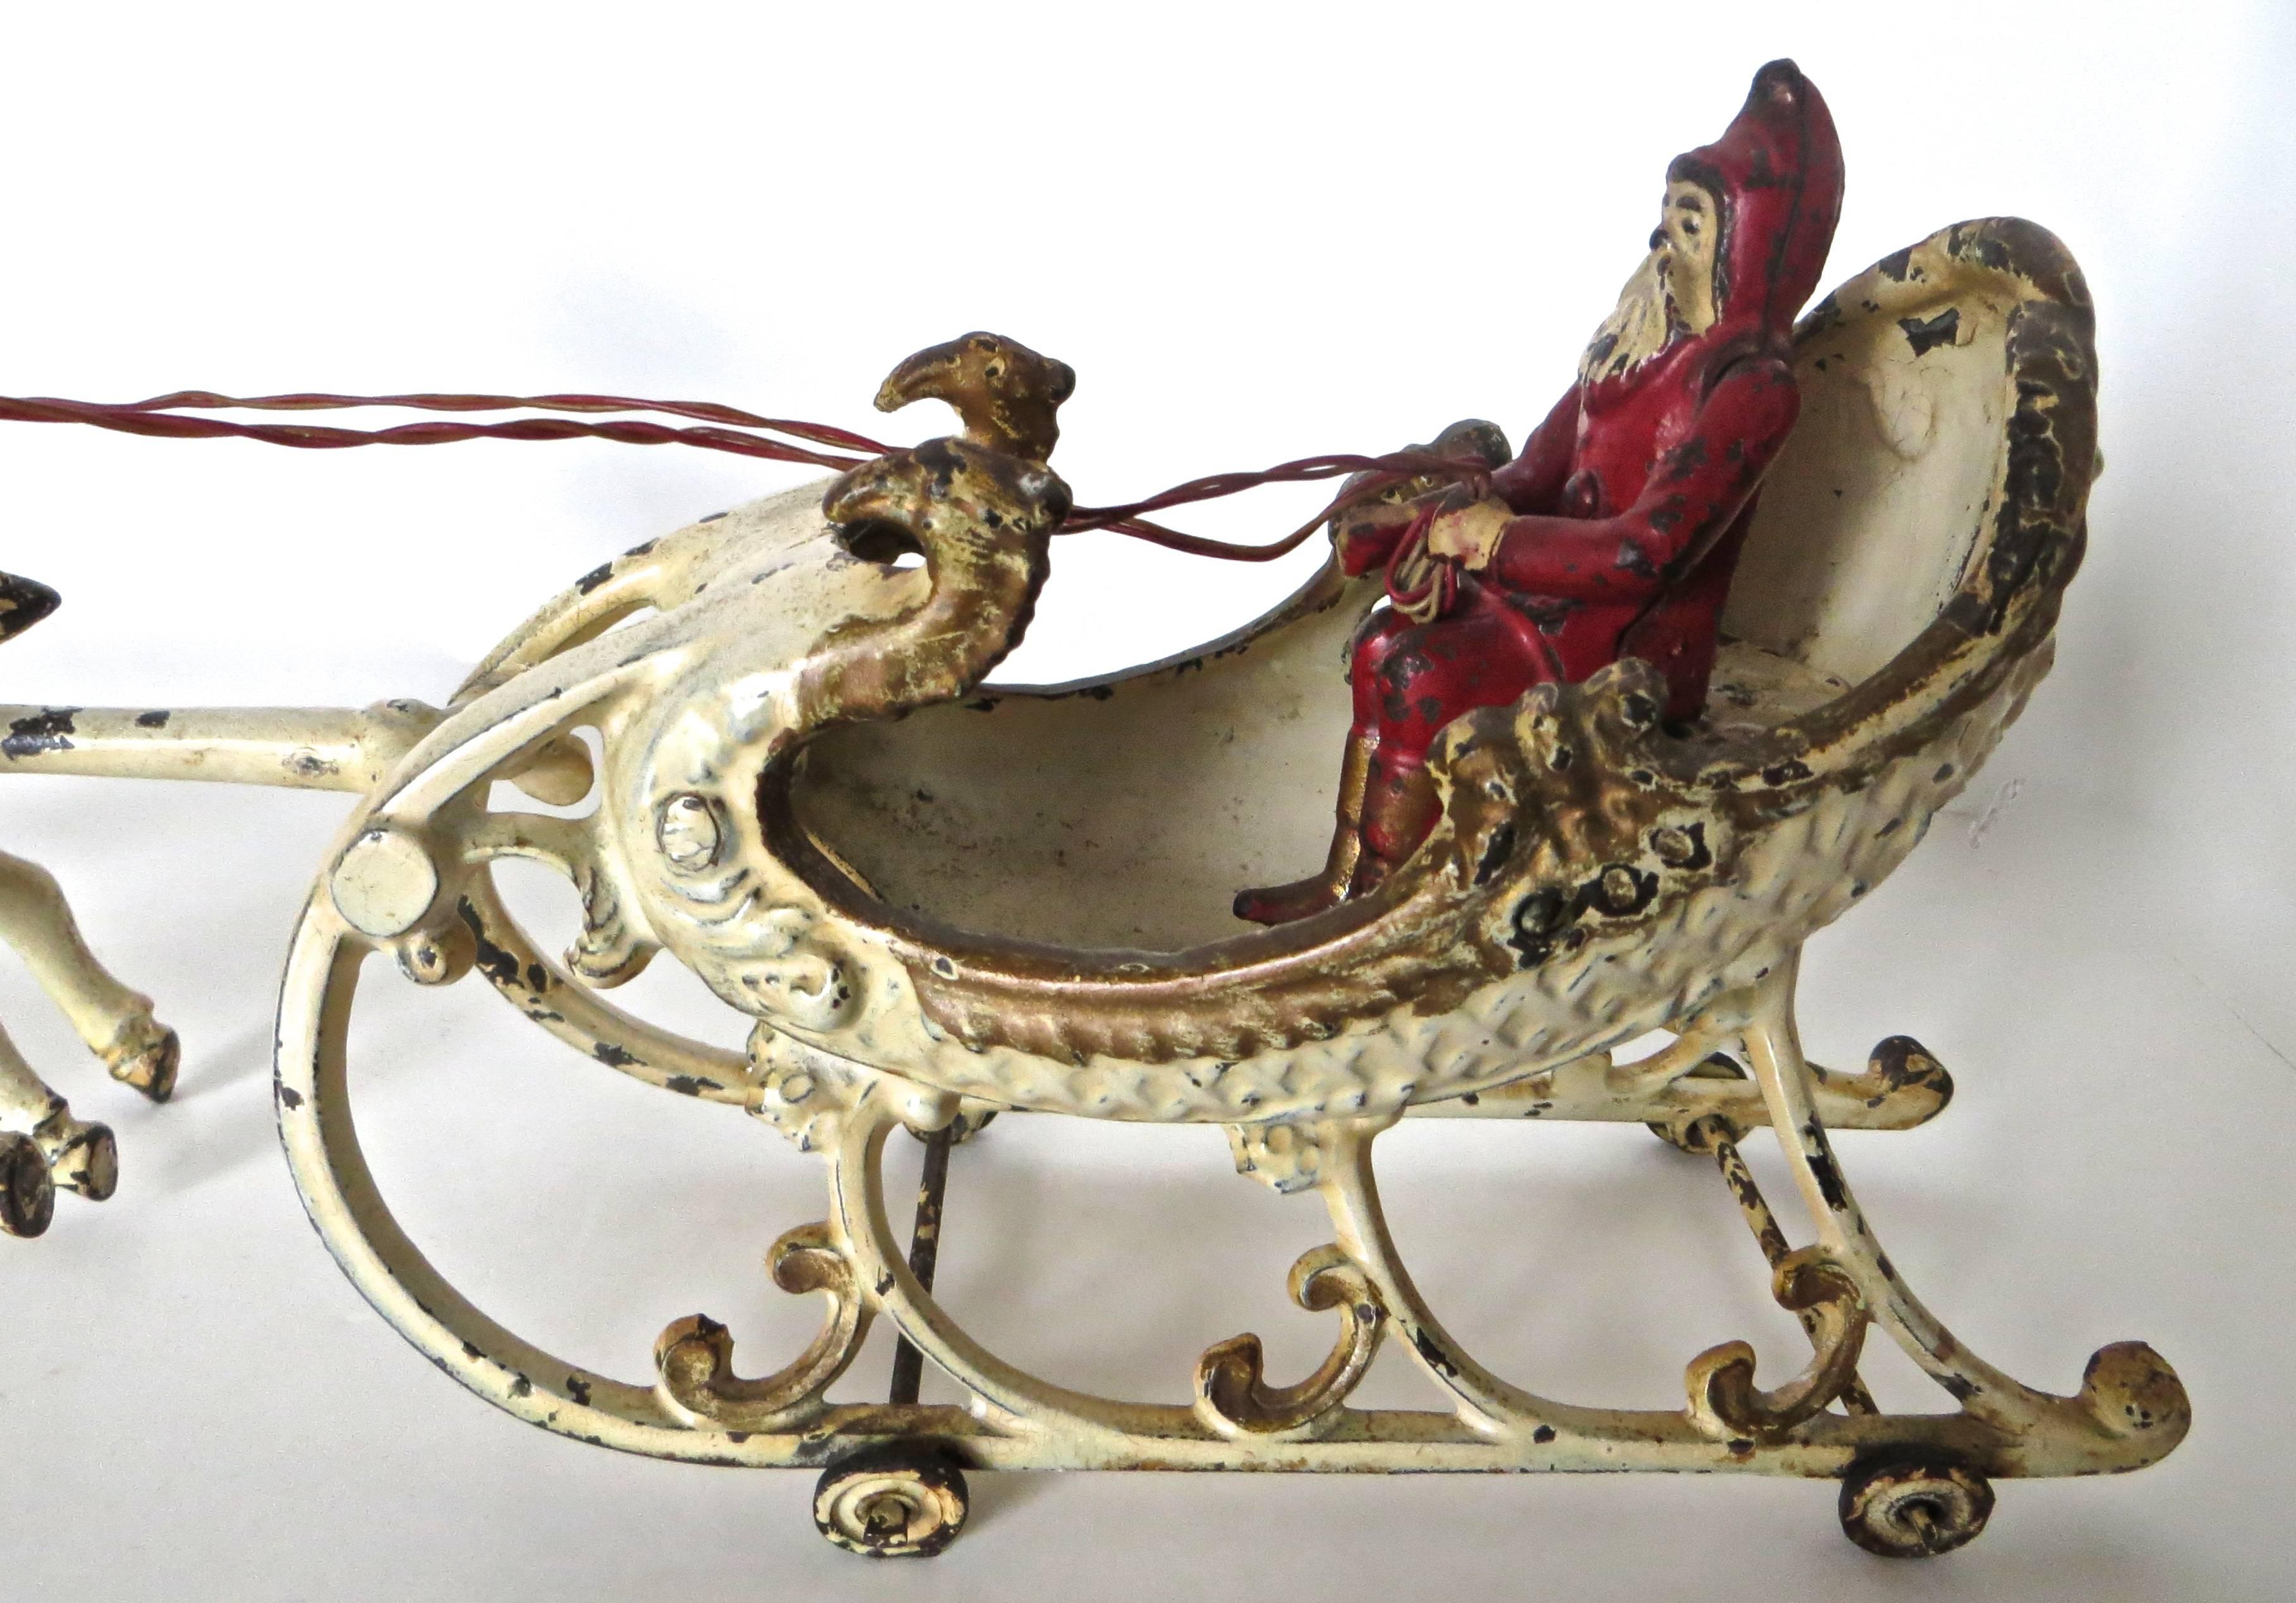 Folk Art Santa in the Sleigh with Two Reindeer by Hubley, circa 1900